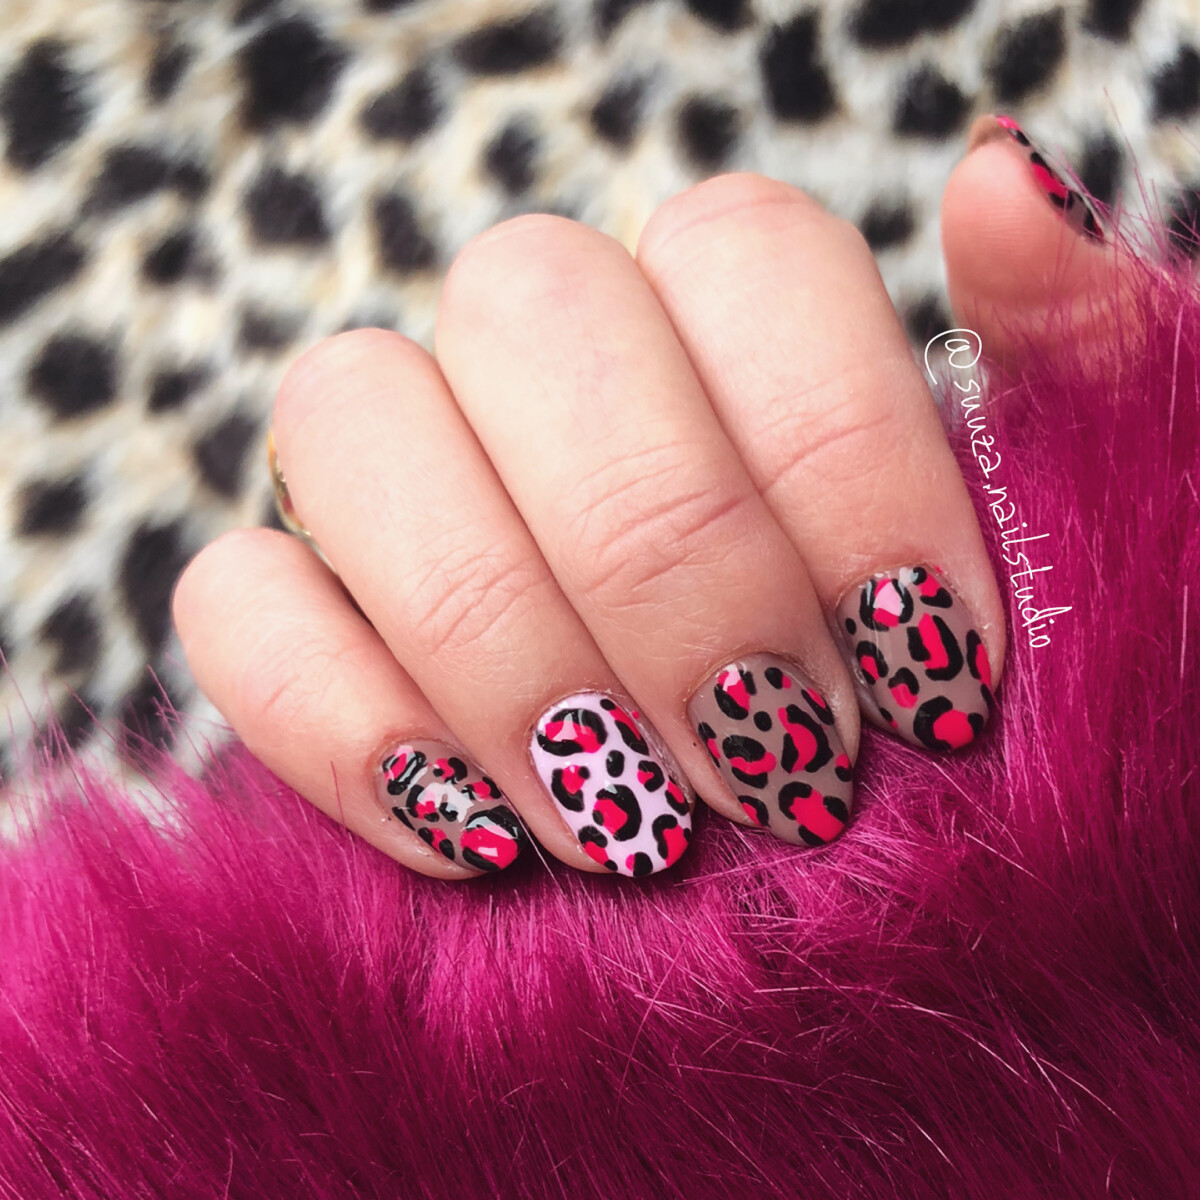 Leopard nail art - hand painted